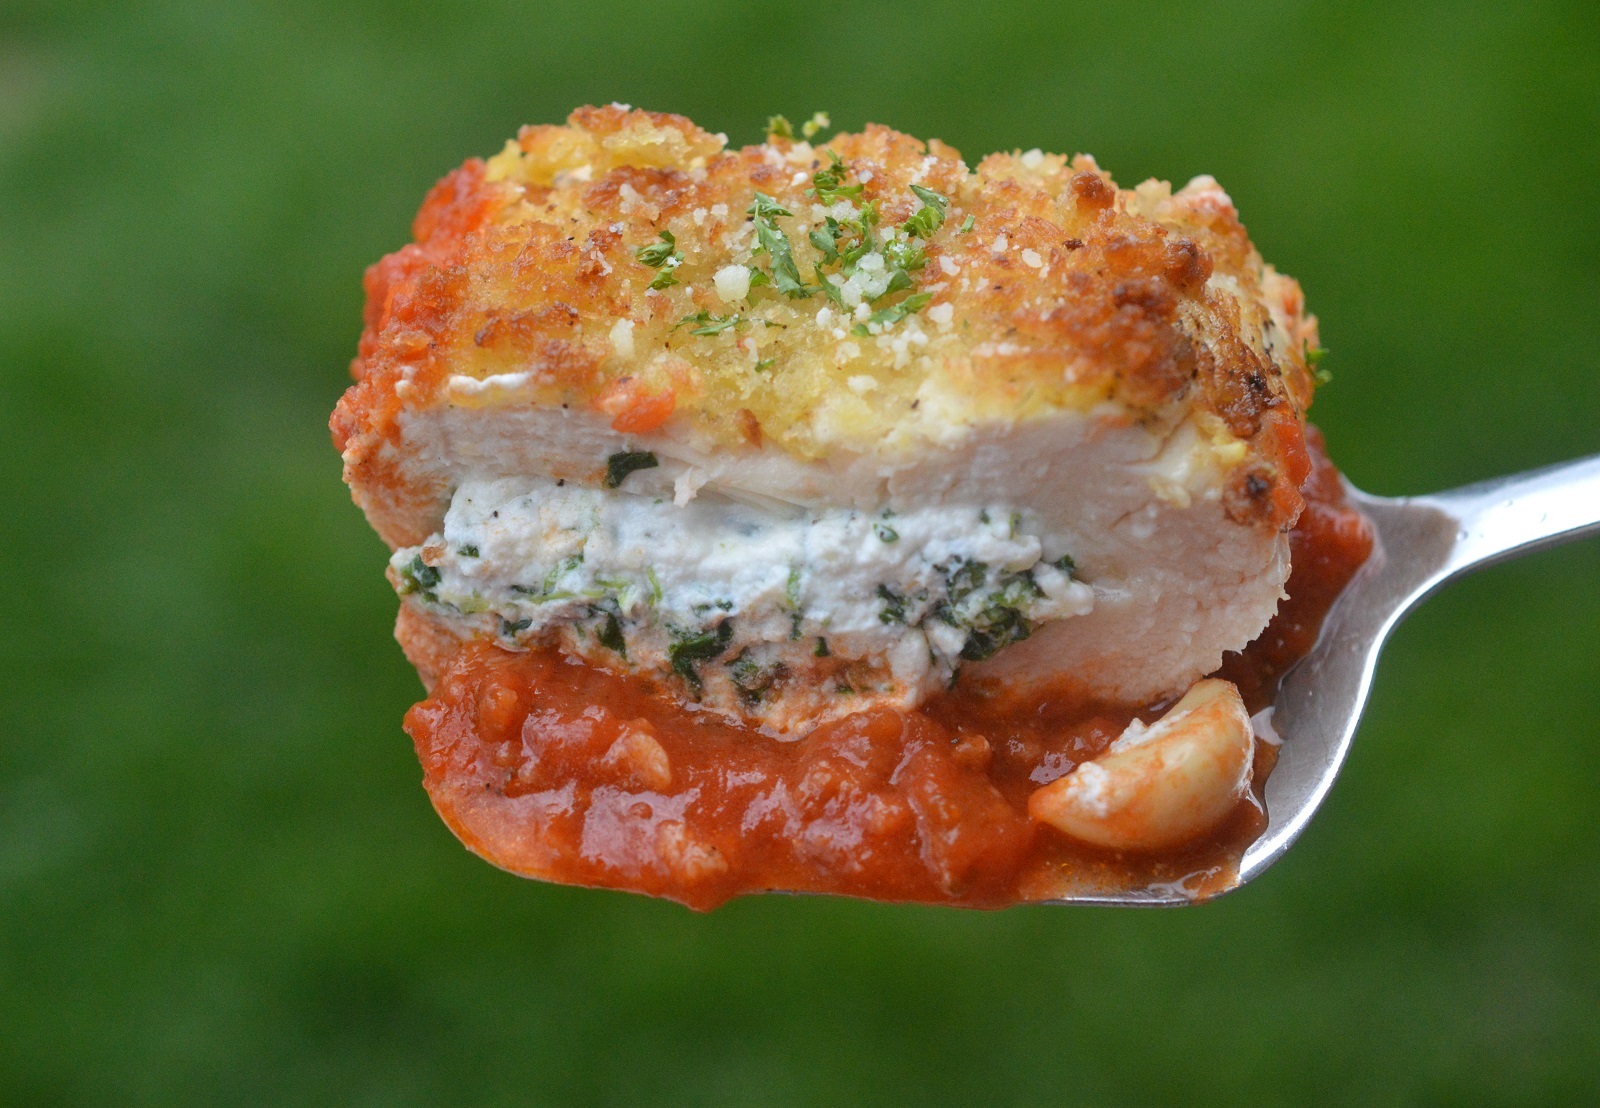 Lasagna Stuffed Chicken Breasts with Spinach